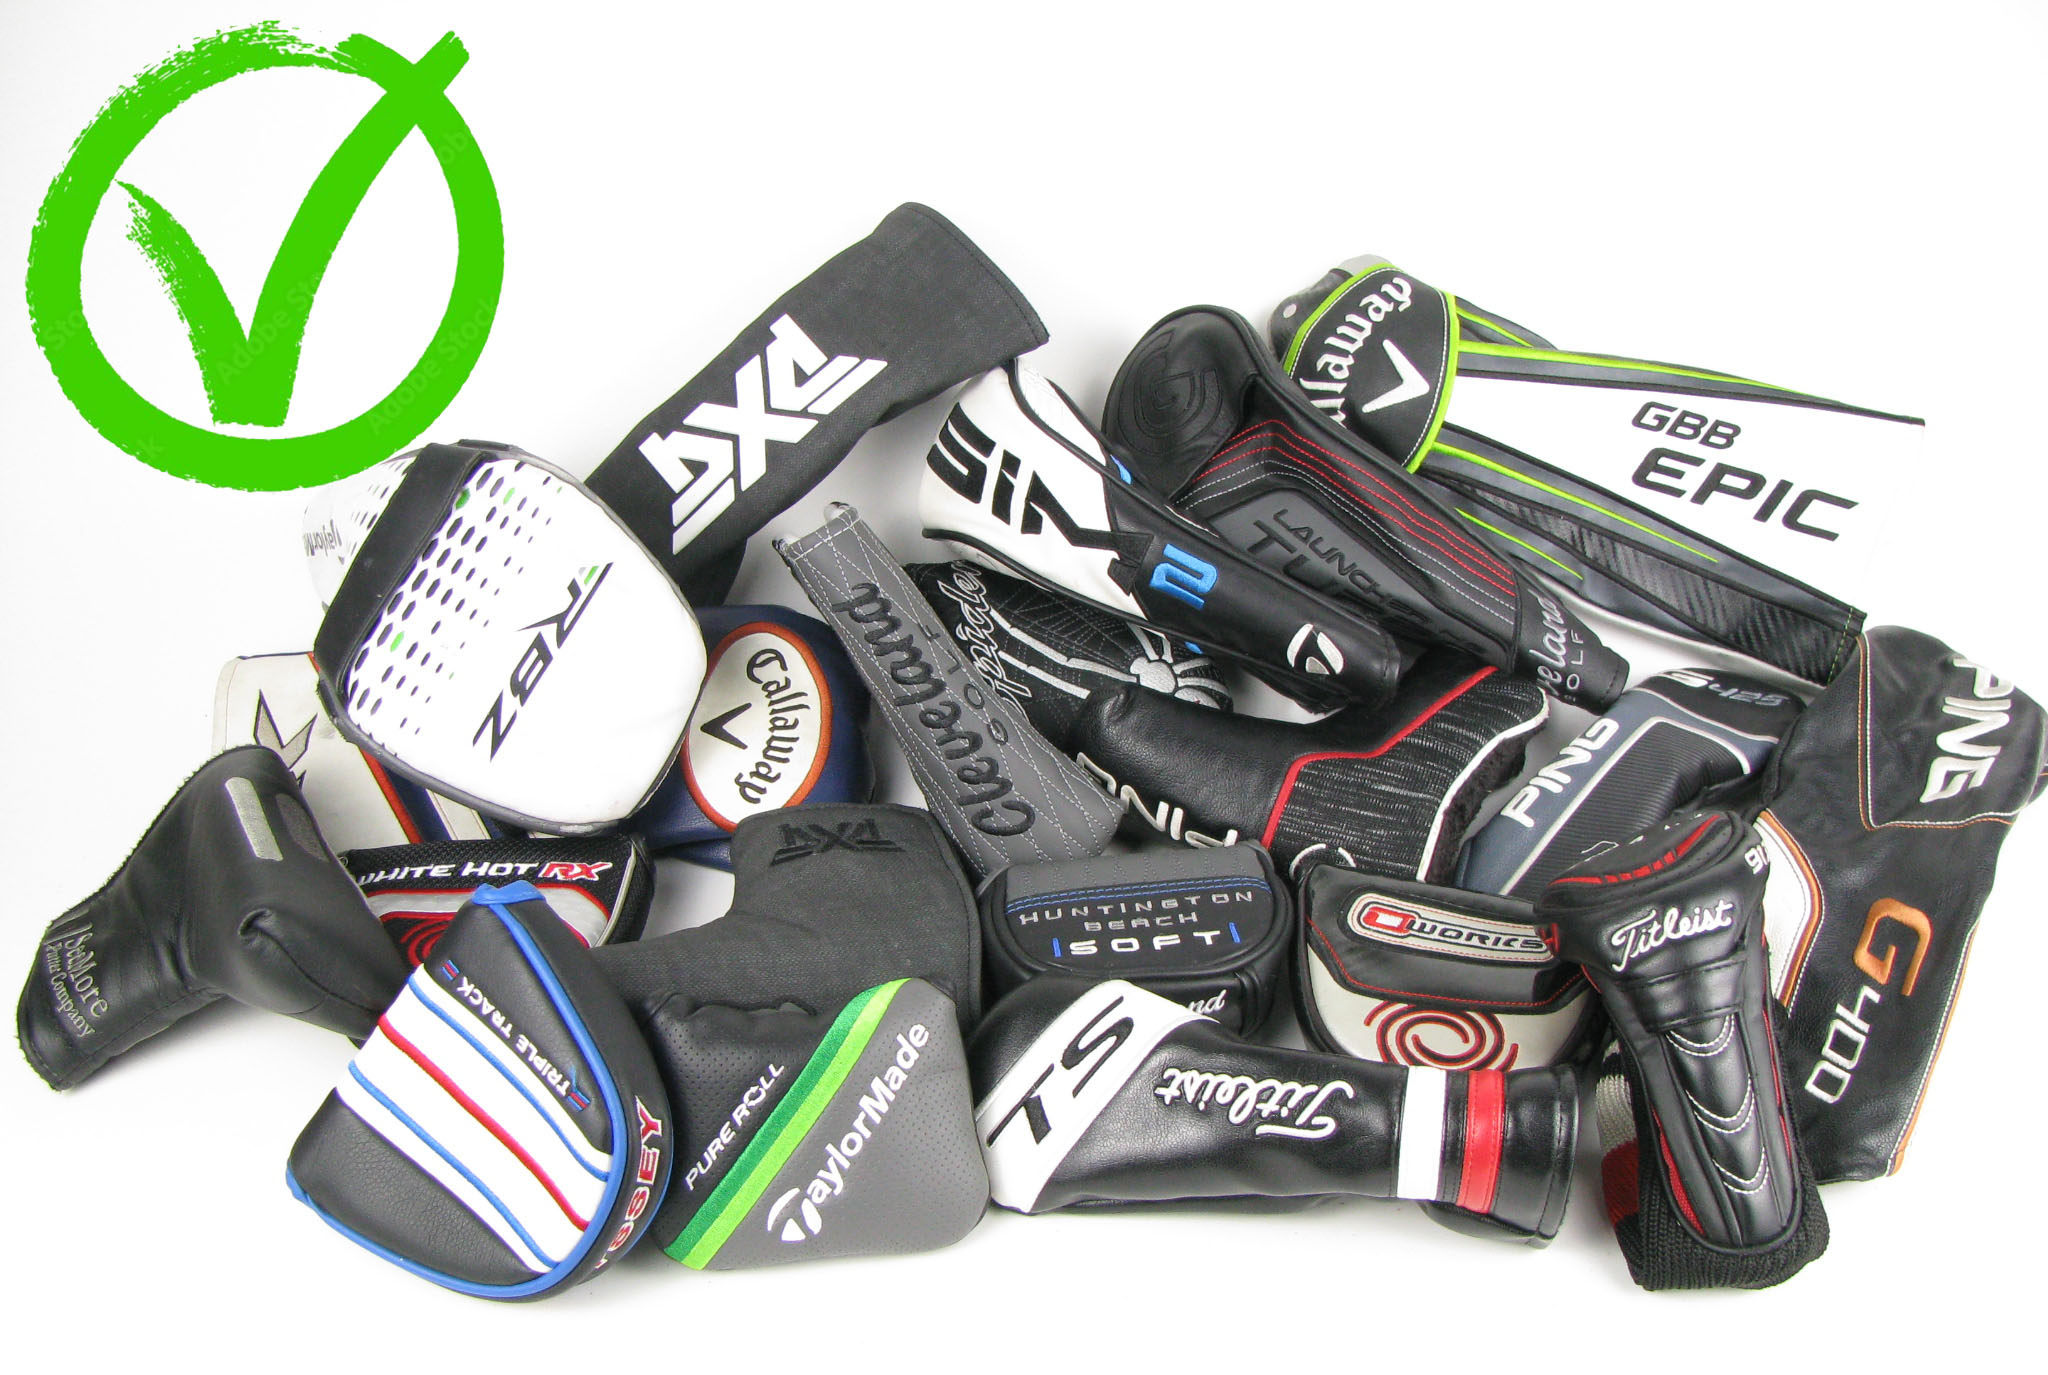 We purchased used golf headcovers